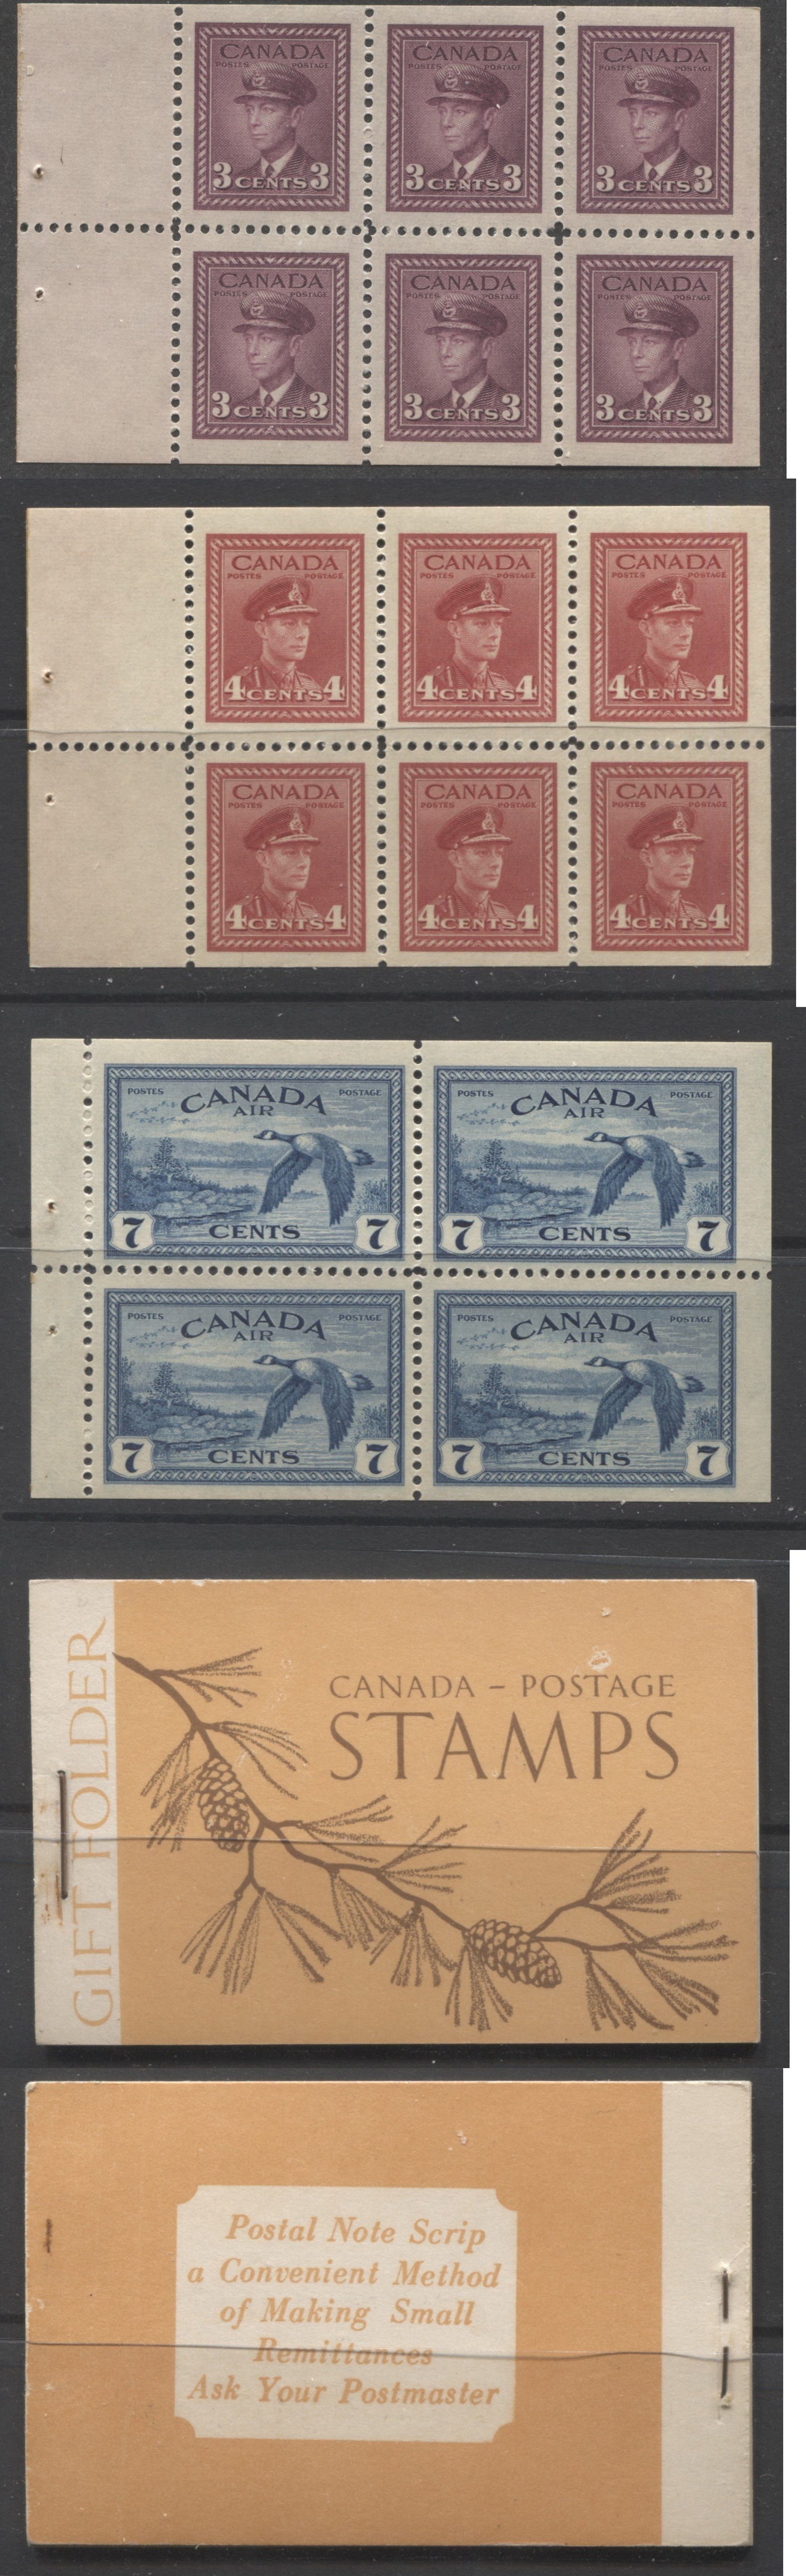 Canada #BK39a (McCann #39b) 1942-1949 War Issue Complete $1.00, English Booklet Containing 1 Pane Each of 6 of 3c and 4c Plus 2 Panes of 4 7c Airmail Stamps, 14 mm Staple, Brown and Light Orange Cover, Constant Donut Flaw Above "T" of Postage Brixton Chrome 